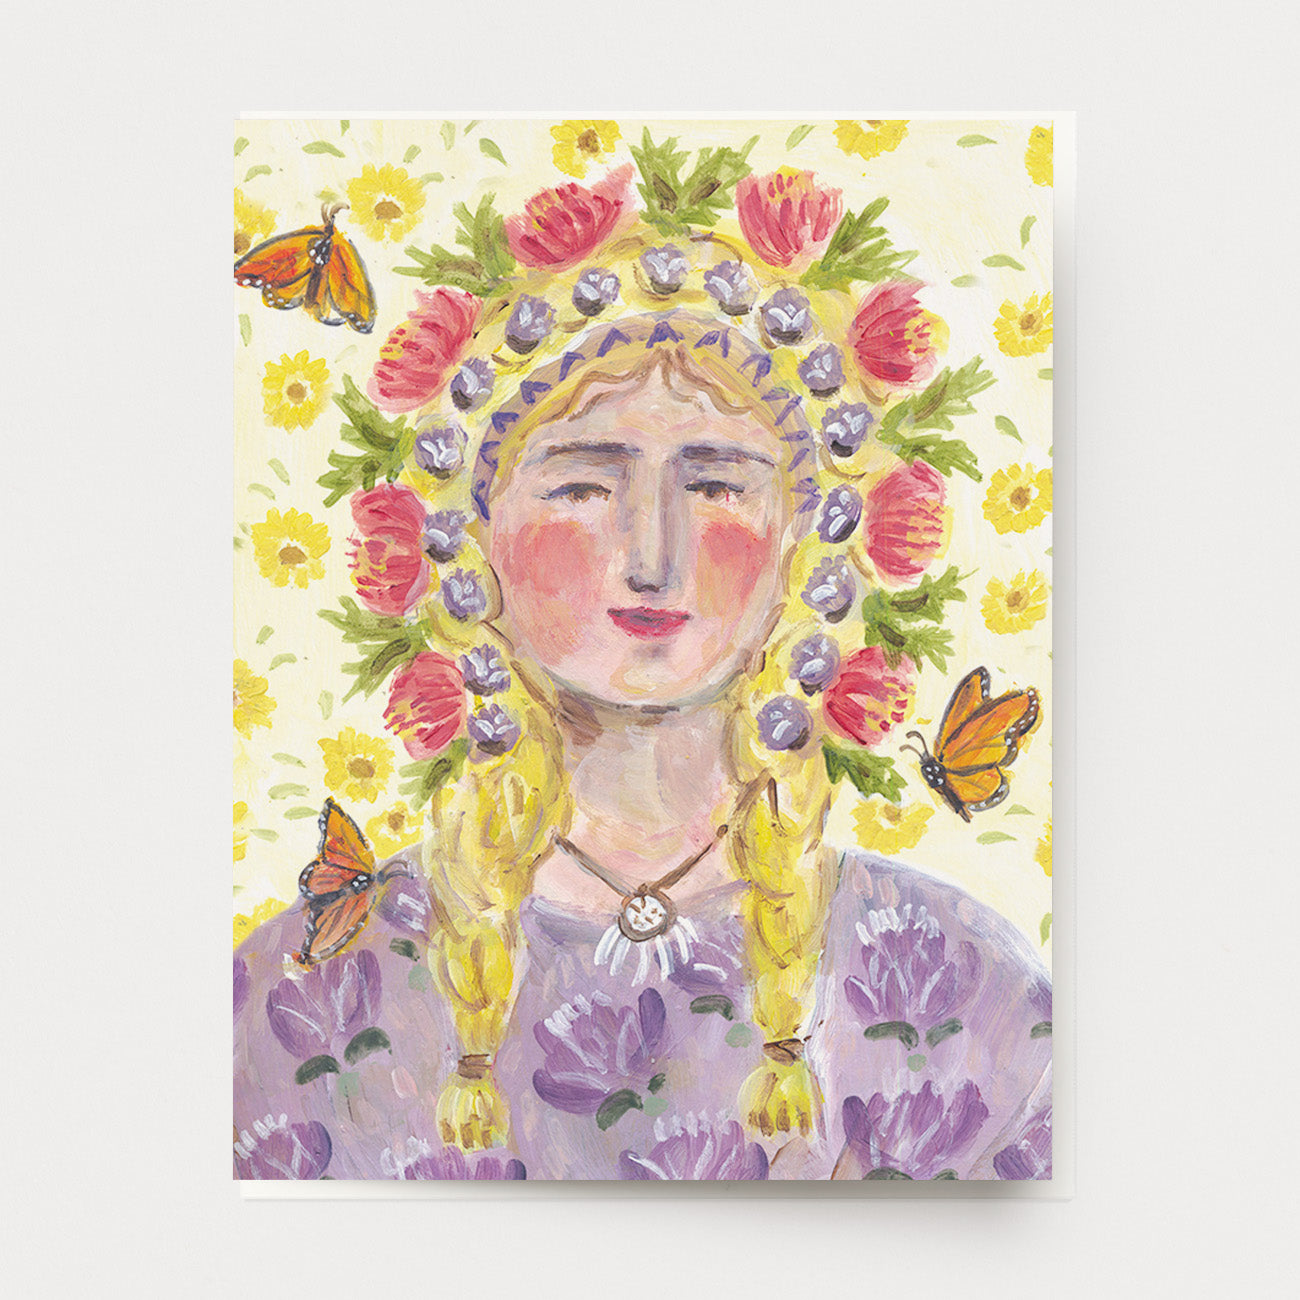 A greeting card of a peaceful blond woman with a colorful floral crown, a background of yellow flowers, a purple floral dress and monarch butterflies flying around.  Hand illustrated and made by Ingrid Press card and gift company, ethically printed in the USA. 